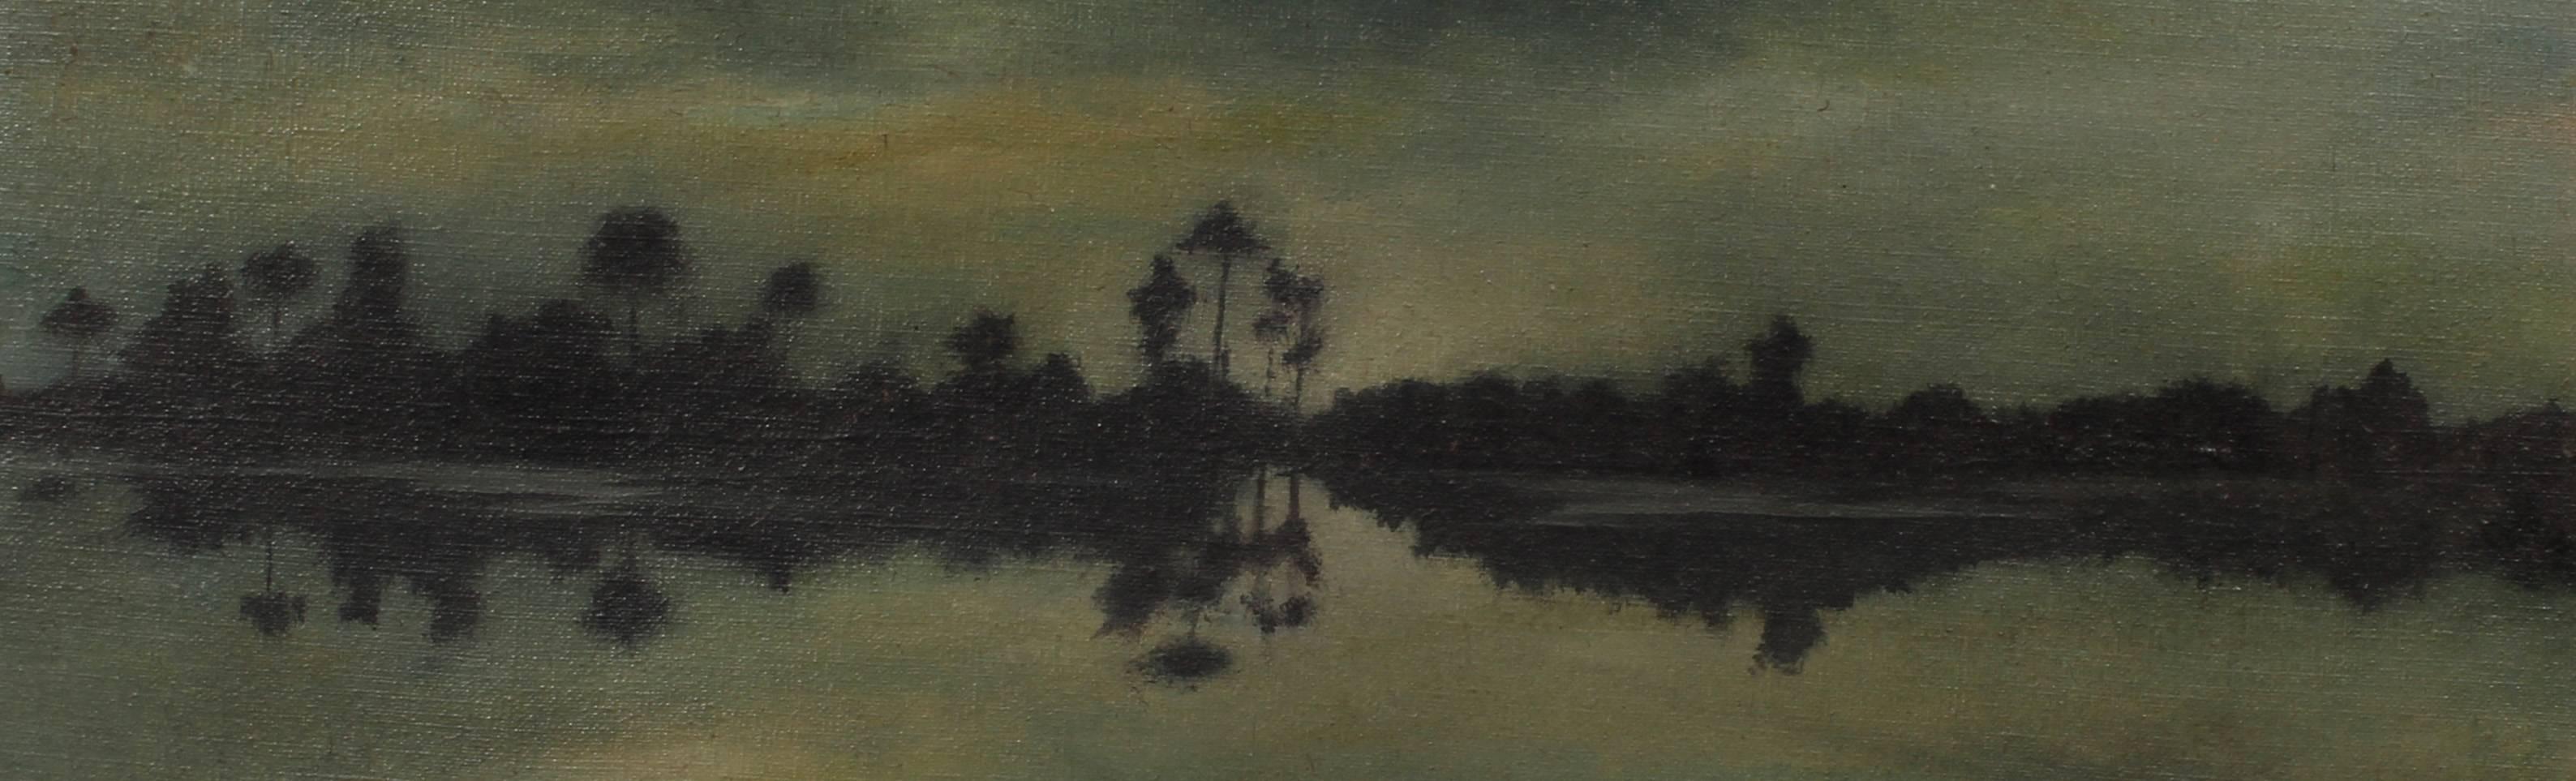 Southern Swamp Landscape - Tonalist Painting by Unknown